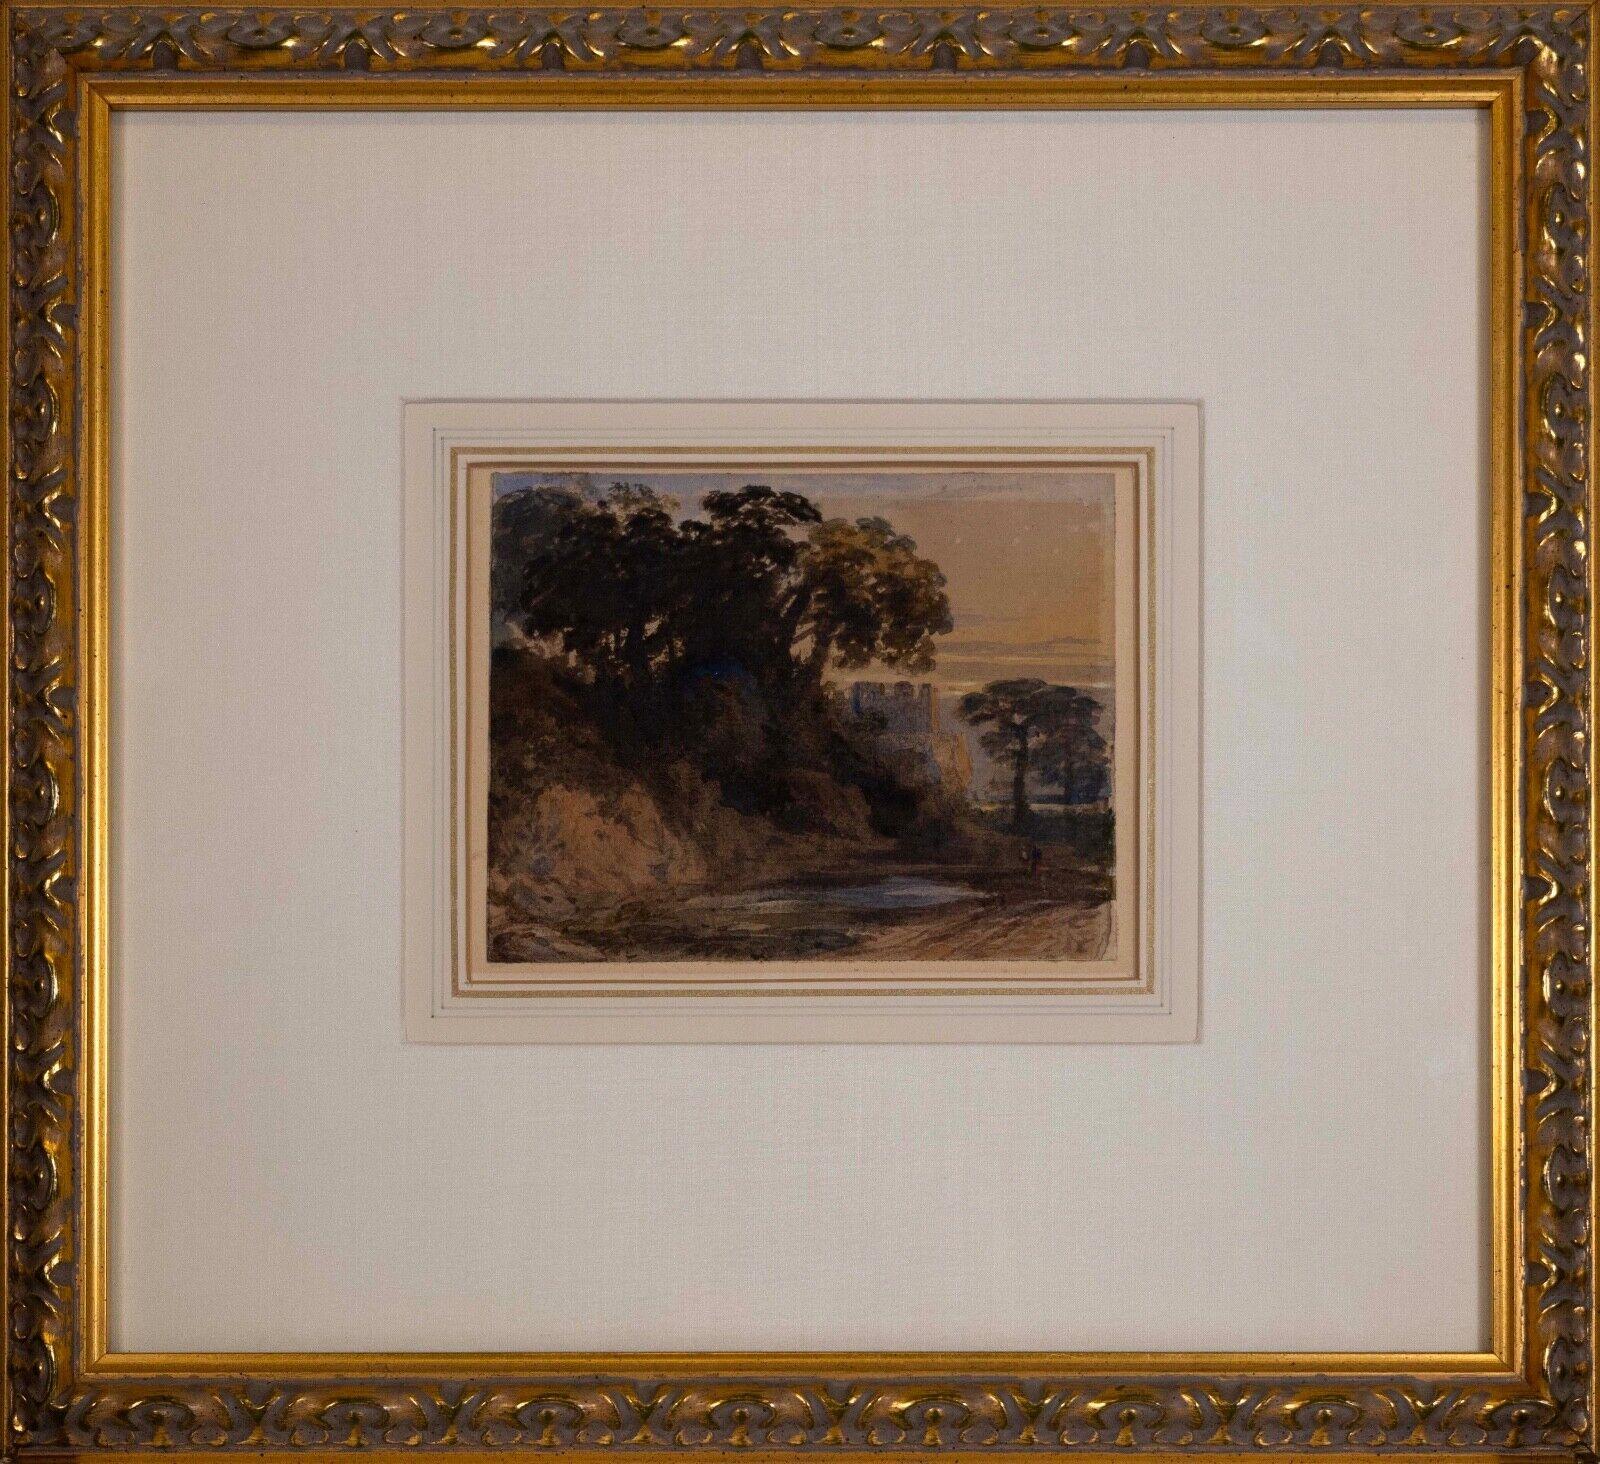 A tranquil and peaceful watercolor on paper depicting a landscape with a fortress by English artist John Varley. Circa early 1800s. According to the Encyclopædia Britannica Eleventh Edition, 